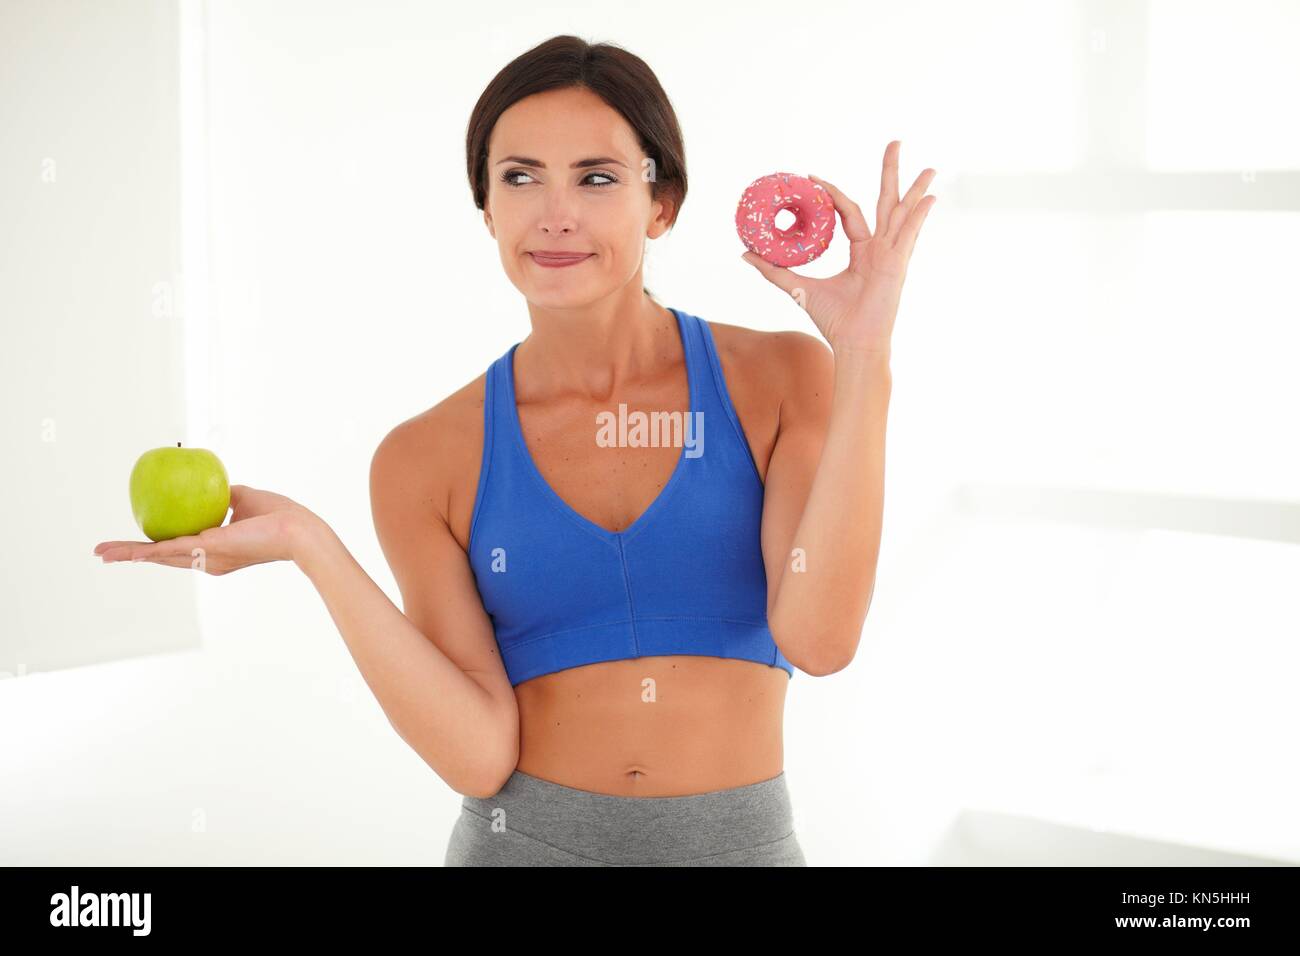 Female in training clothes holding sugary cake and fruit while is deciding. Stock Photo